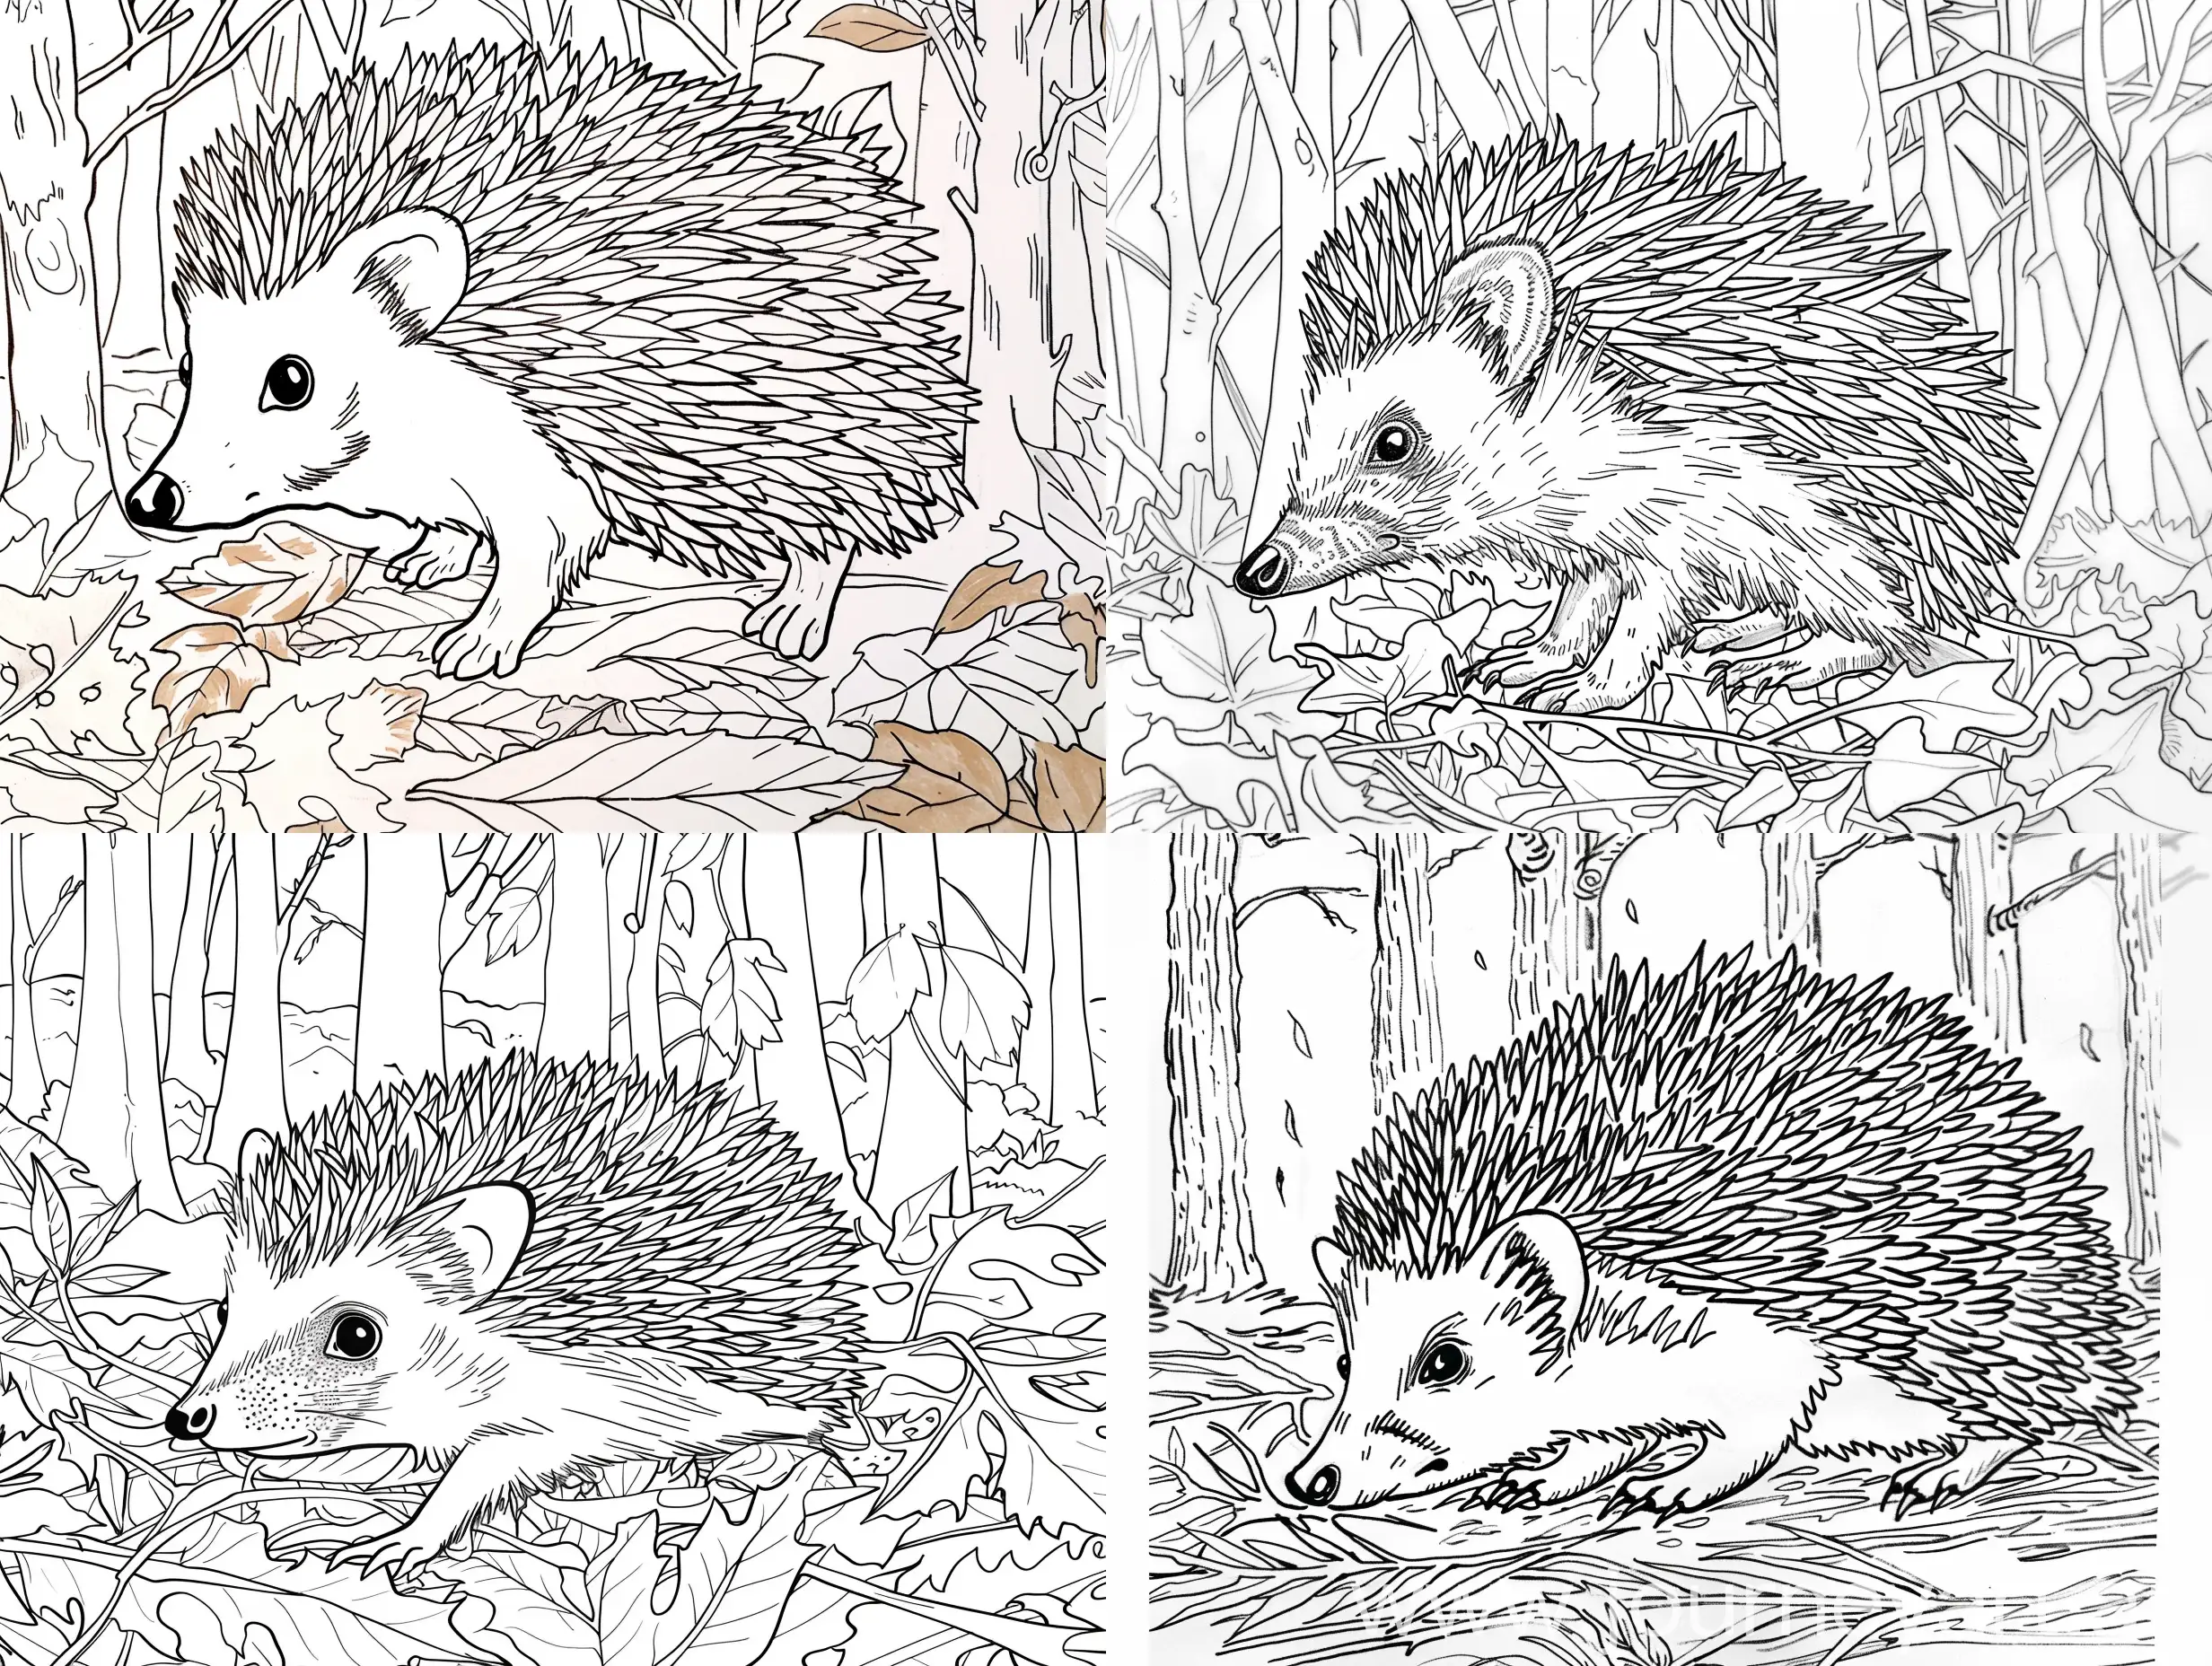 Hedgehog-in-the-Forest-Coloring-Page-with-Black-Outlines